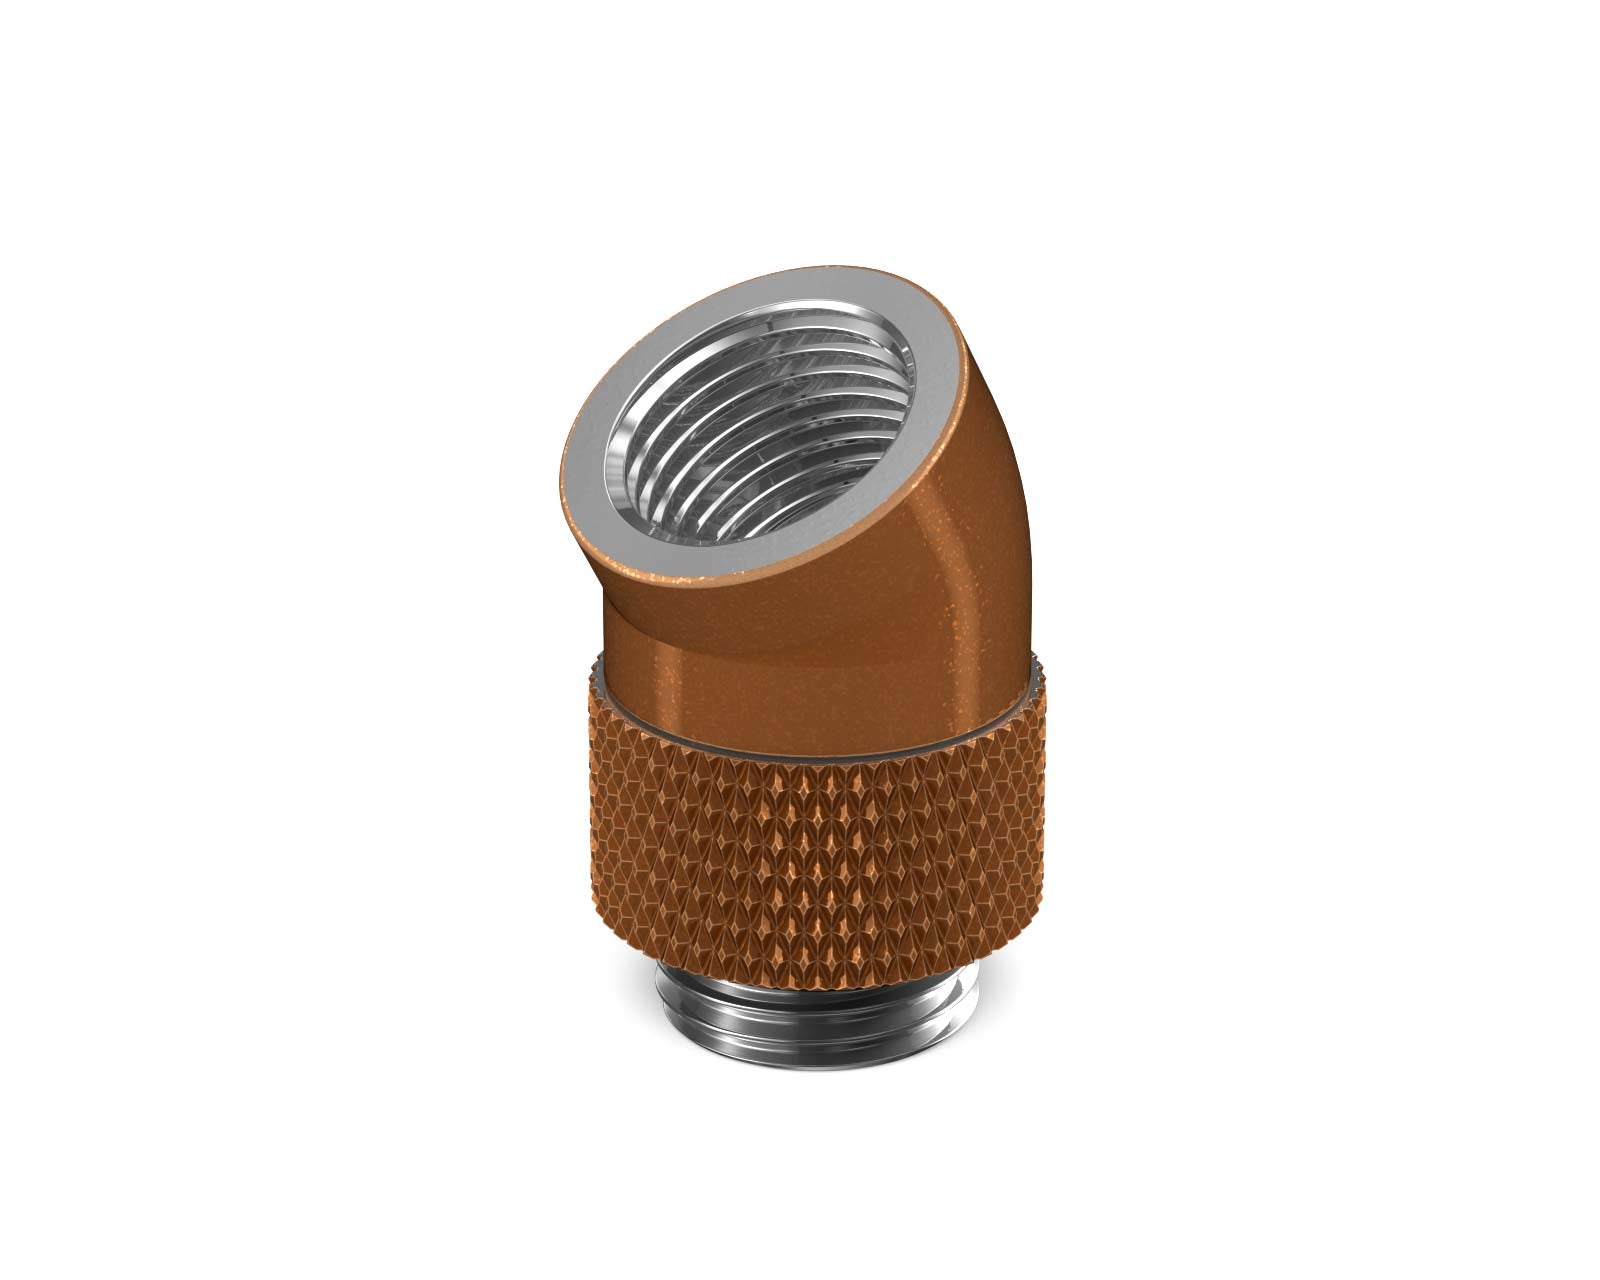 BSTOCK:PrimoChill Male to Female G 1/4in. 30 Degree SX Rotary Elbow Fitting